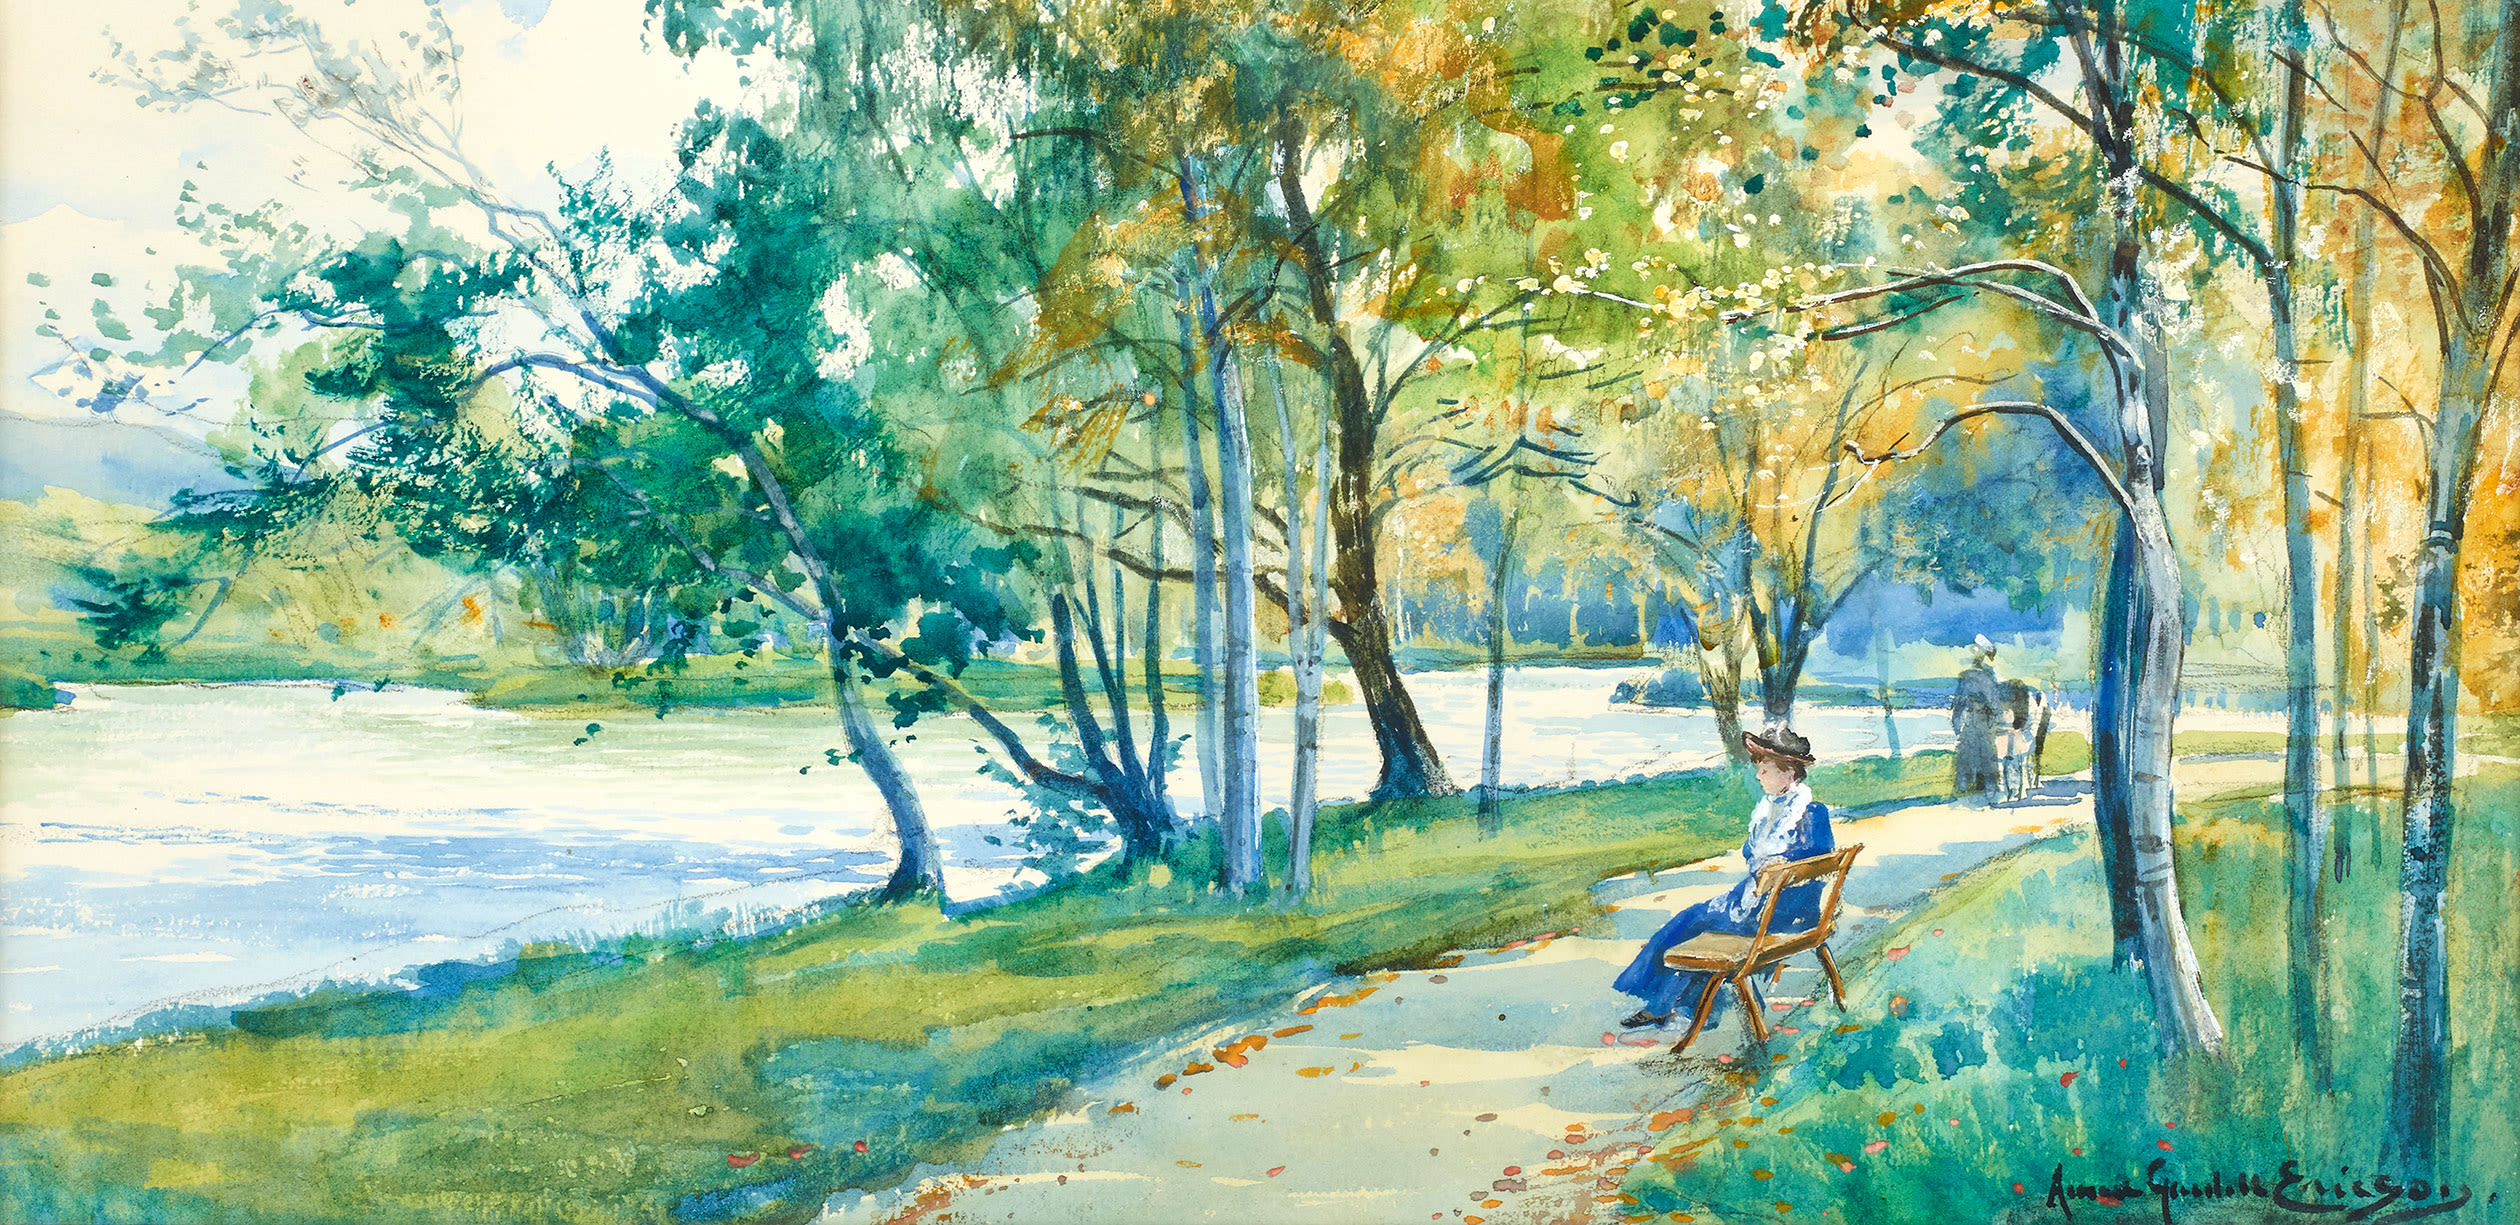 watercolour painting of a path by a lake in a park, a woman sits on a park bench under trees in a variety of shades of green.